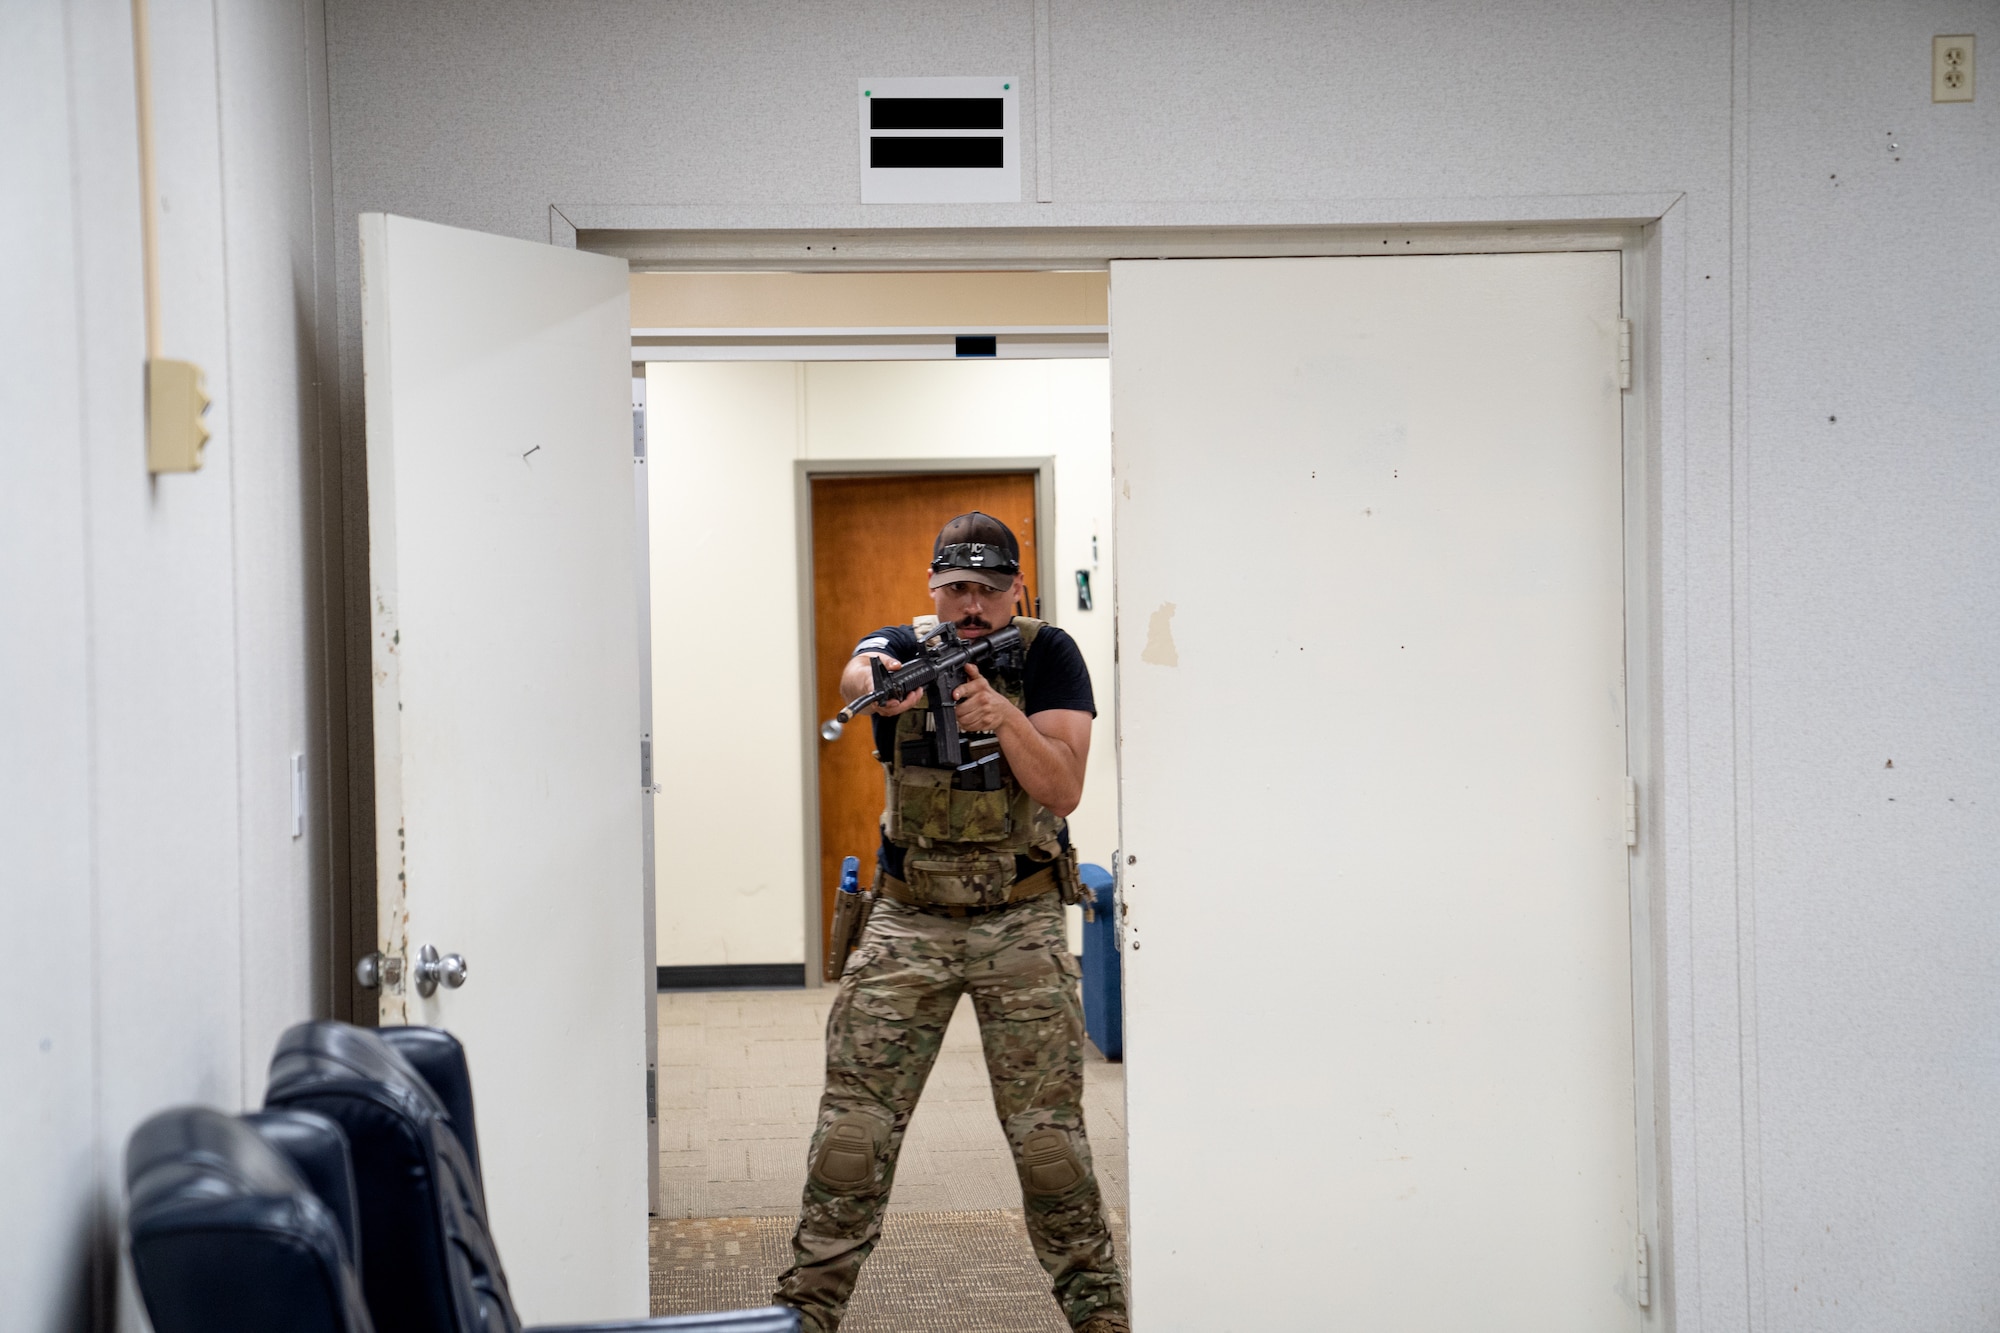 U.S. Air Force Staff Sgt. Michael Dazzo, 5th Combat Communications Support Squadron Combat Readiness lead instructor, demonstrates how to clear a room for members of the 85th Engineering Installation Squadron using close quarter battle tactics during a MOB school course at Keesler Air Force Base, Mississippi, April 12, 2023. In this course 85th EIS students learn weapons familiarization, combatives and other pre-deployment tactics.